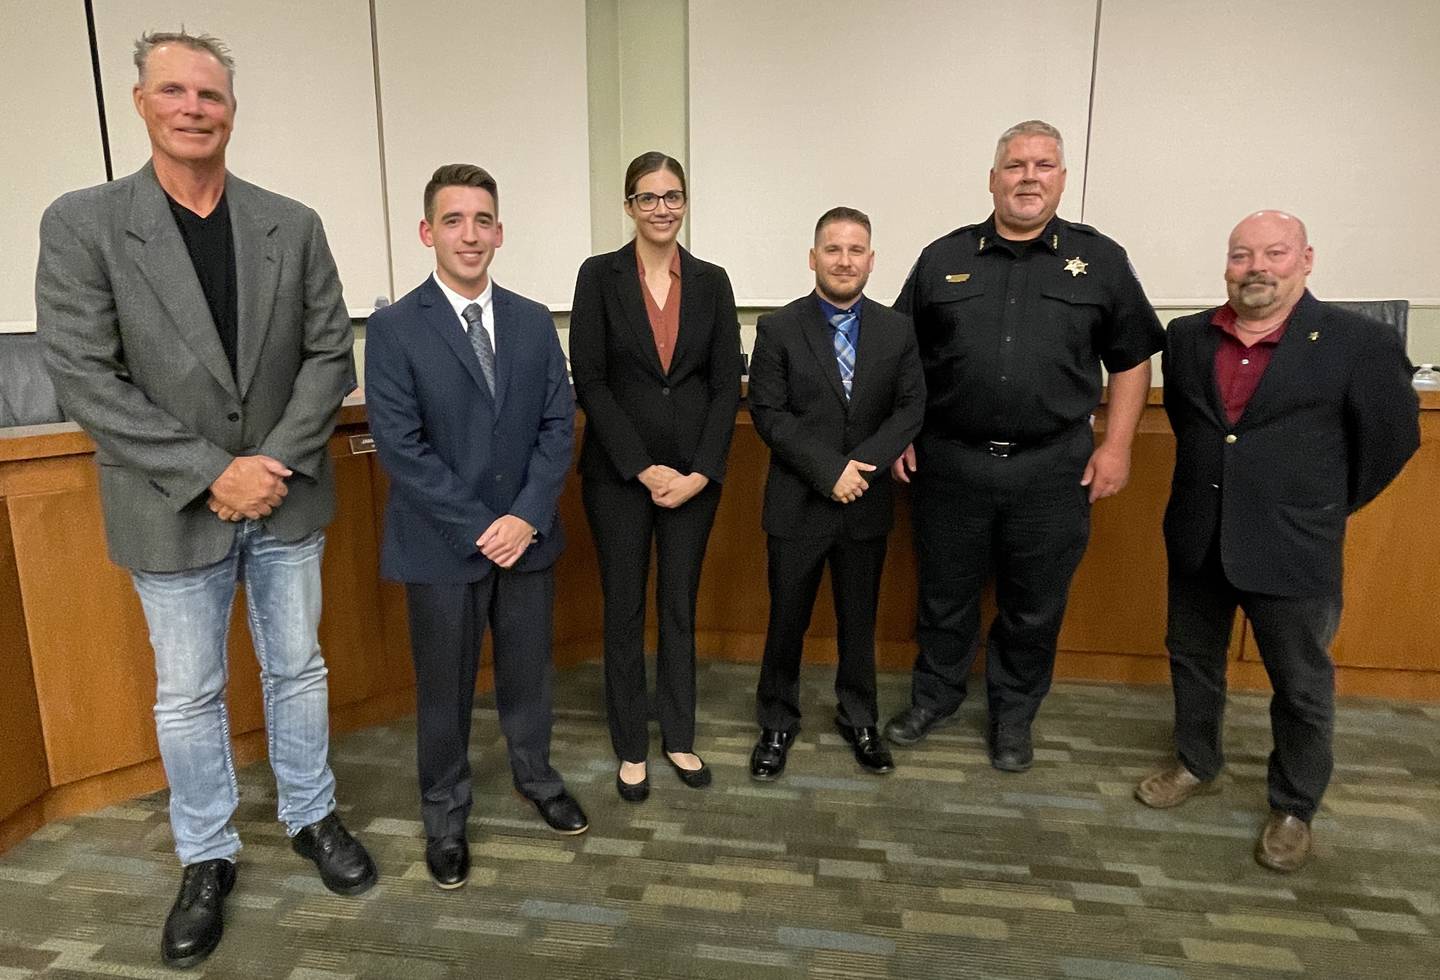 Three new police officers, Austin Svehla, Mary Tesinsky and Jesse Kidd, were sworn in by Village President Troy Parlier, and witnessed by Police Chief Jeff Burgner and commissioner Ron Elvin at Oswego Village Hall on Sept. 6 2022.
(left to right: Parlier, Svehla, Tesinsky, Kidd, Burgner, Elvin)